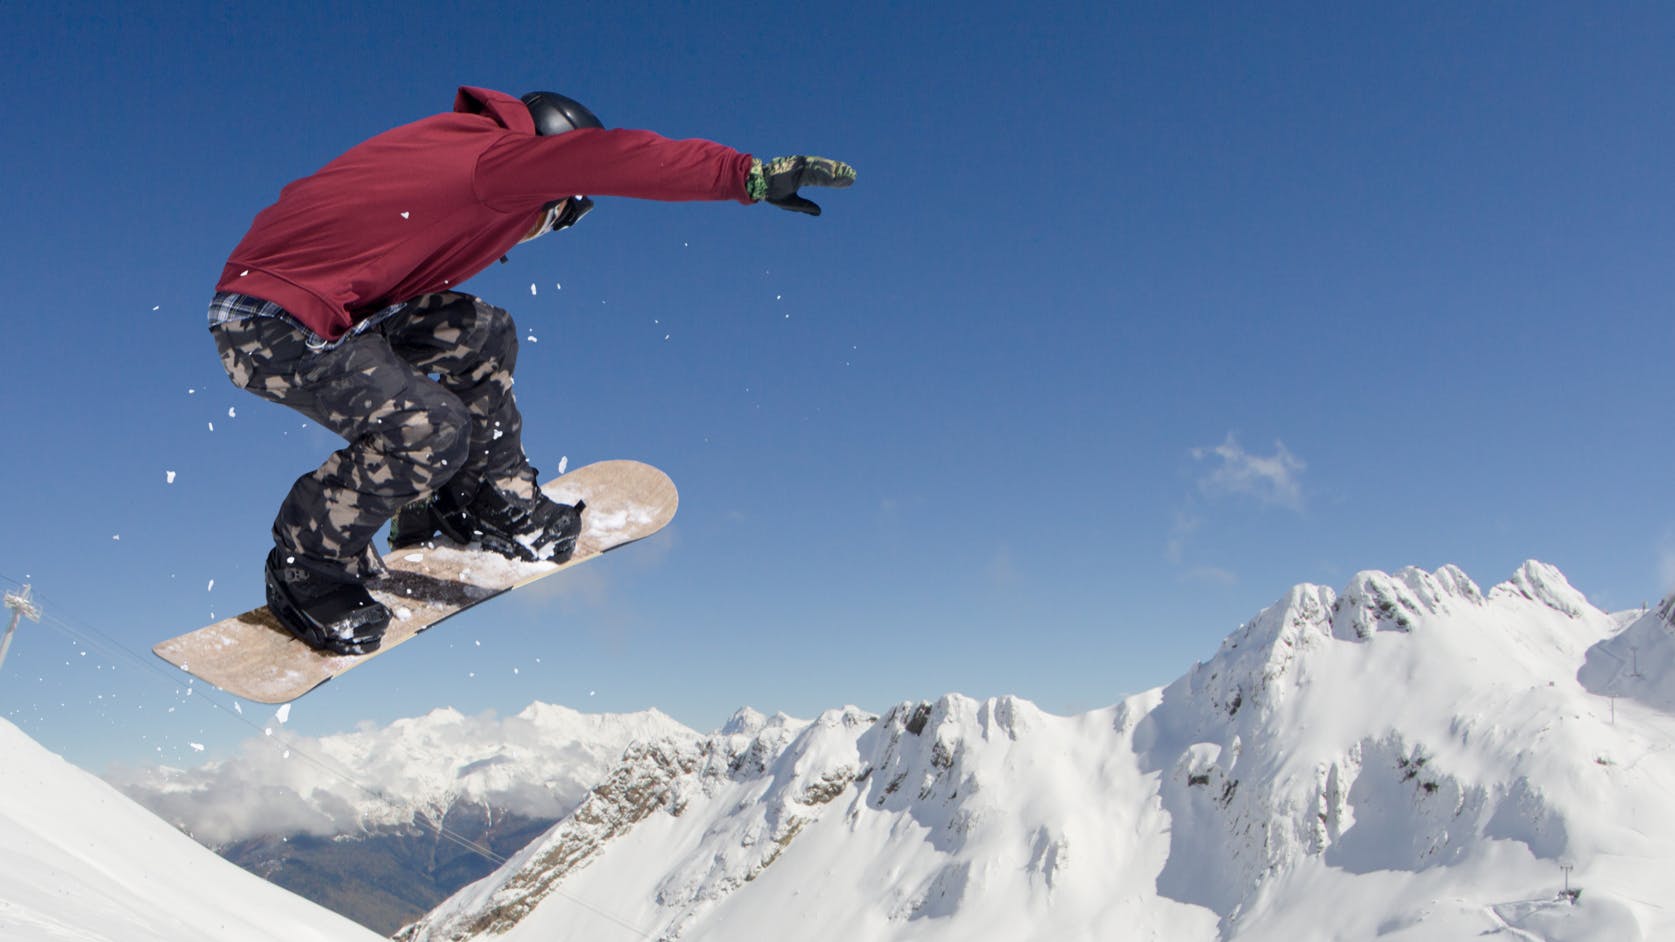 A snowboarder goes off a jump on his snowboard. 